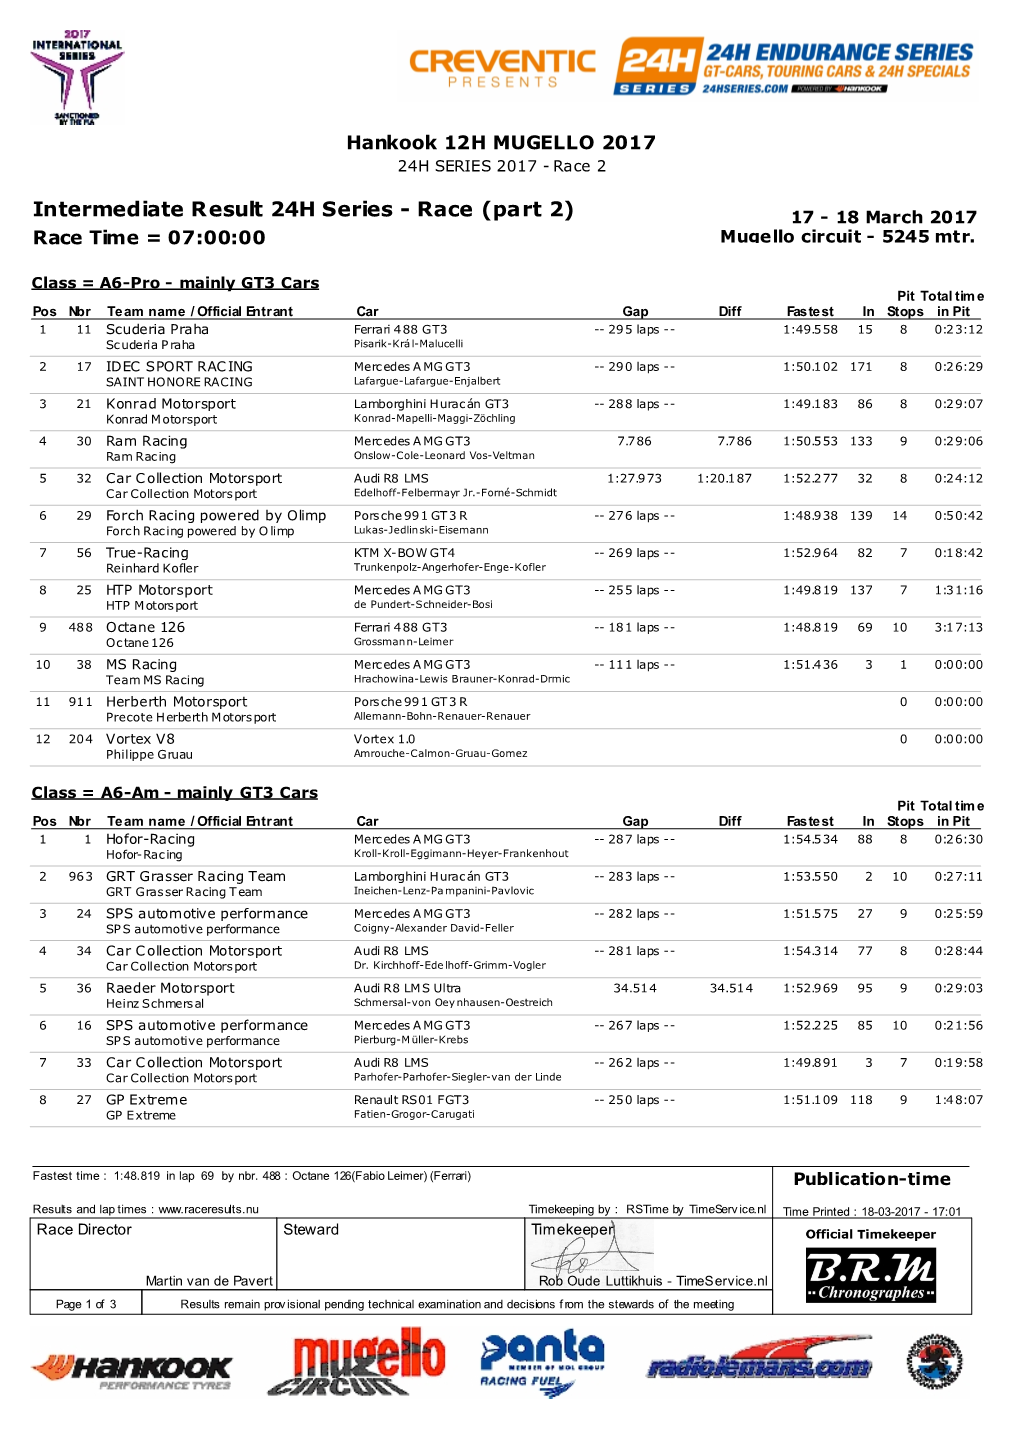 Intermediate Result 24H Series - Race (Part 2) 17 - 18 March 2017 Race Time = 07:00:00 Mugello Circuit - 5245 Mtr